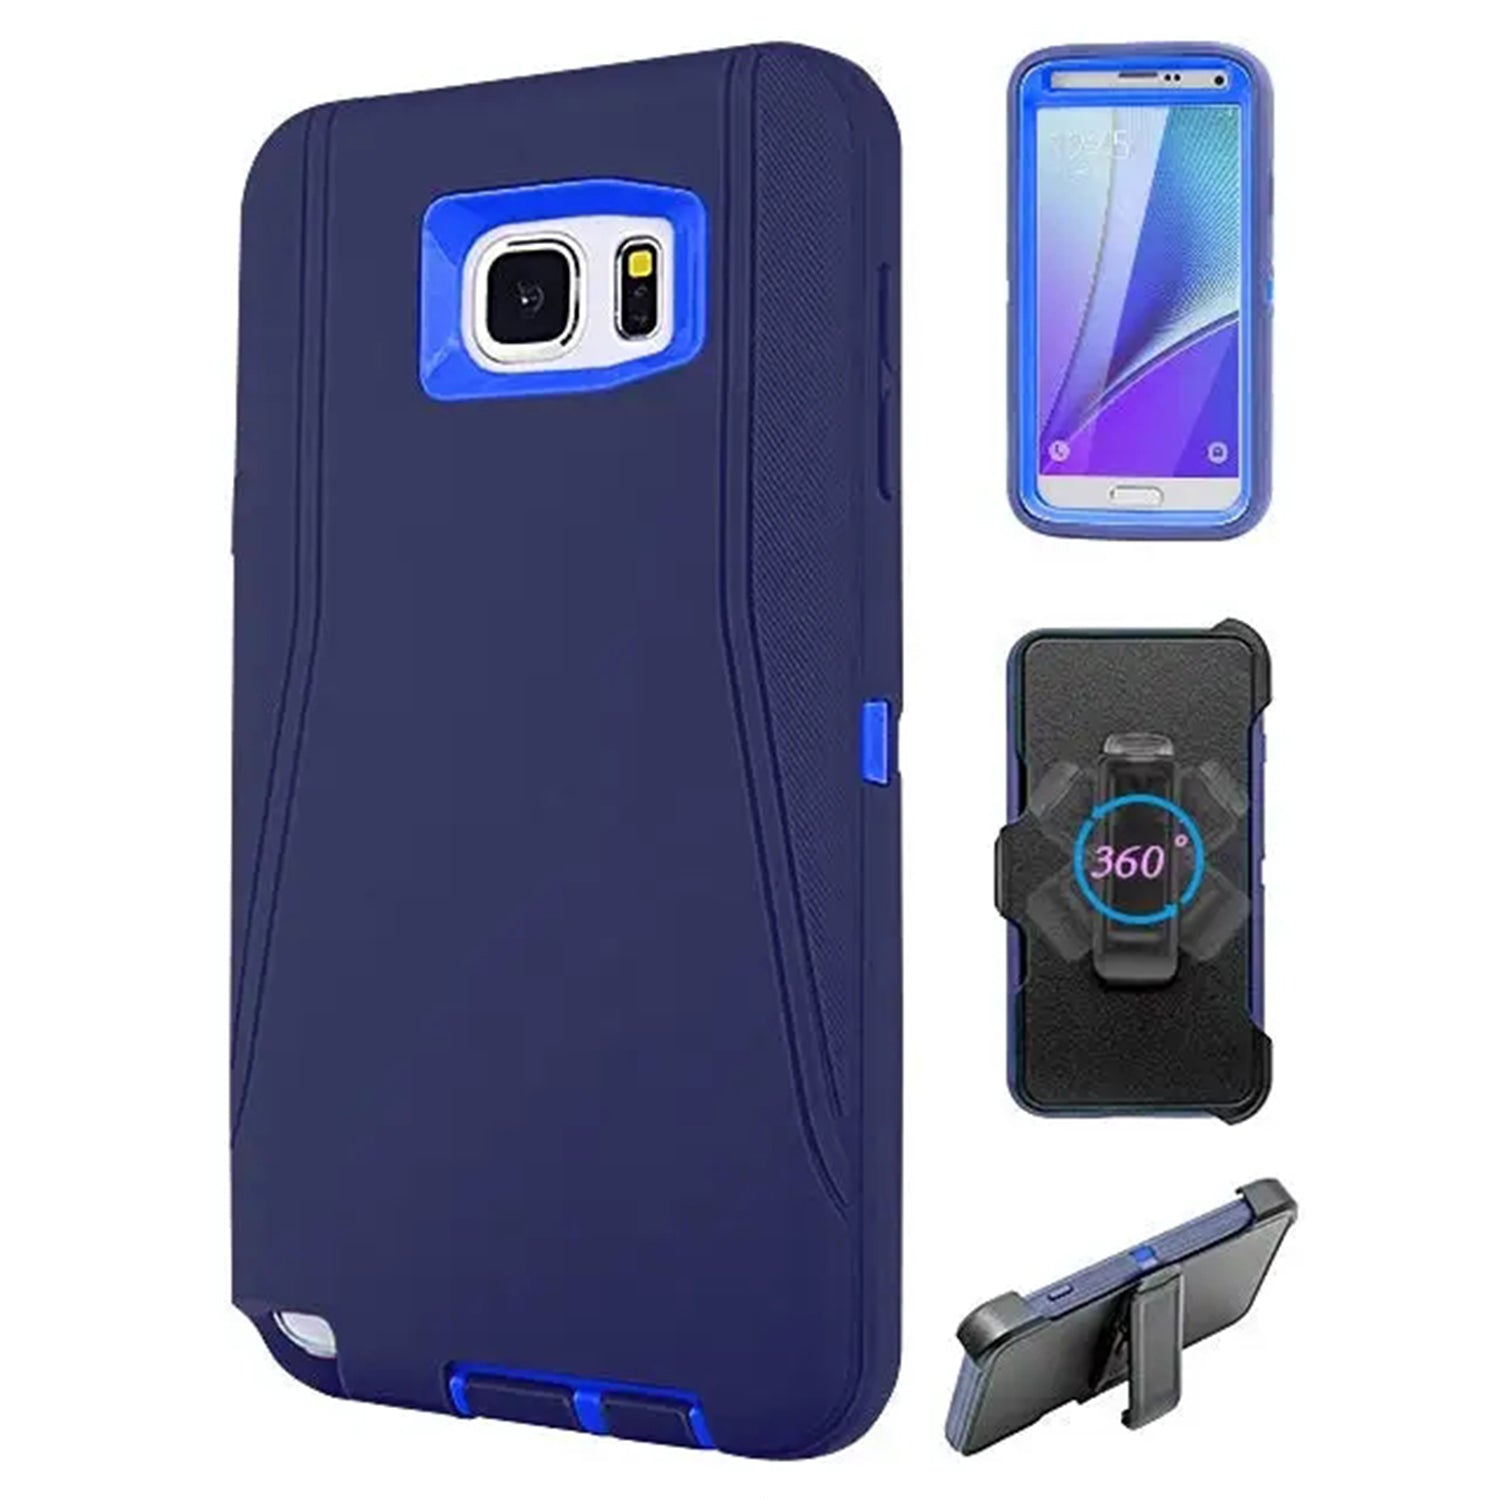 Full Protection Heavy Duty Shockproof Case for Samsung Galaxy Note 5